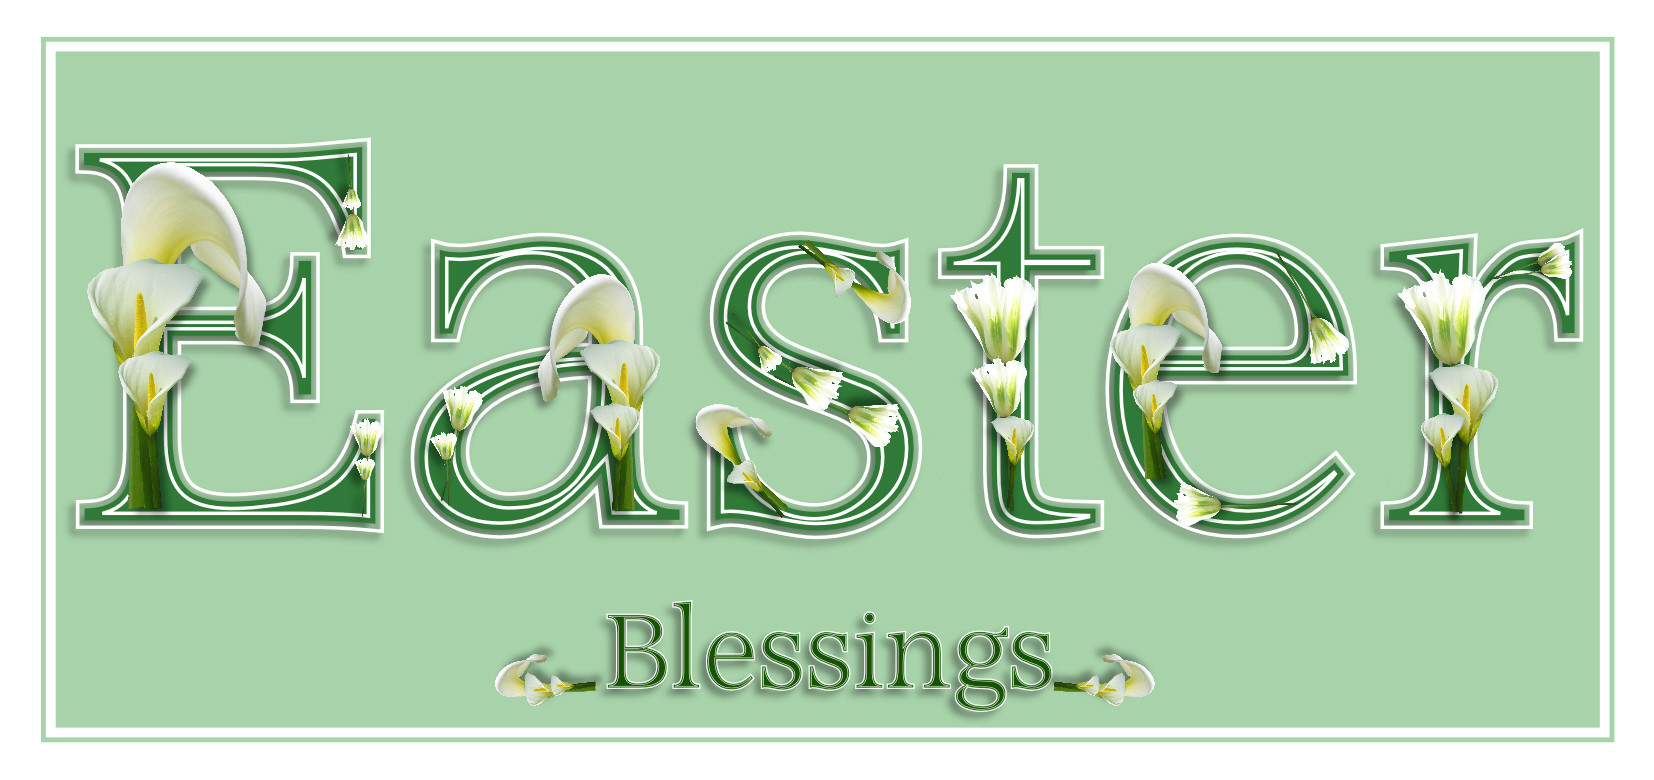 Happy Easter Blessings Quotes
 Easter Blessings Religious Quotes QuotesGram